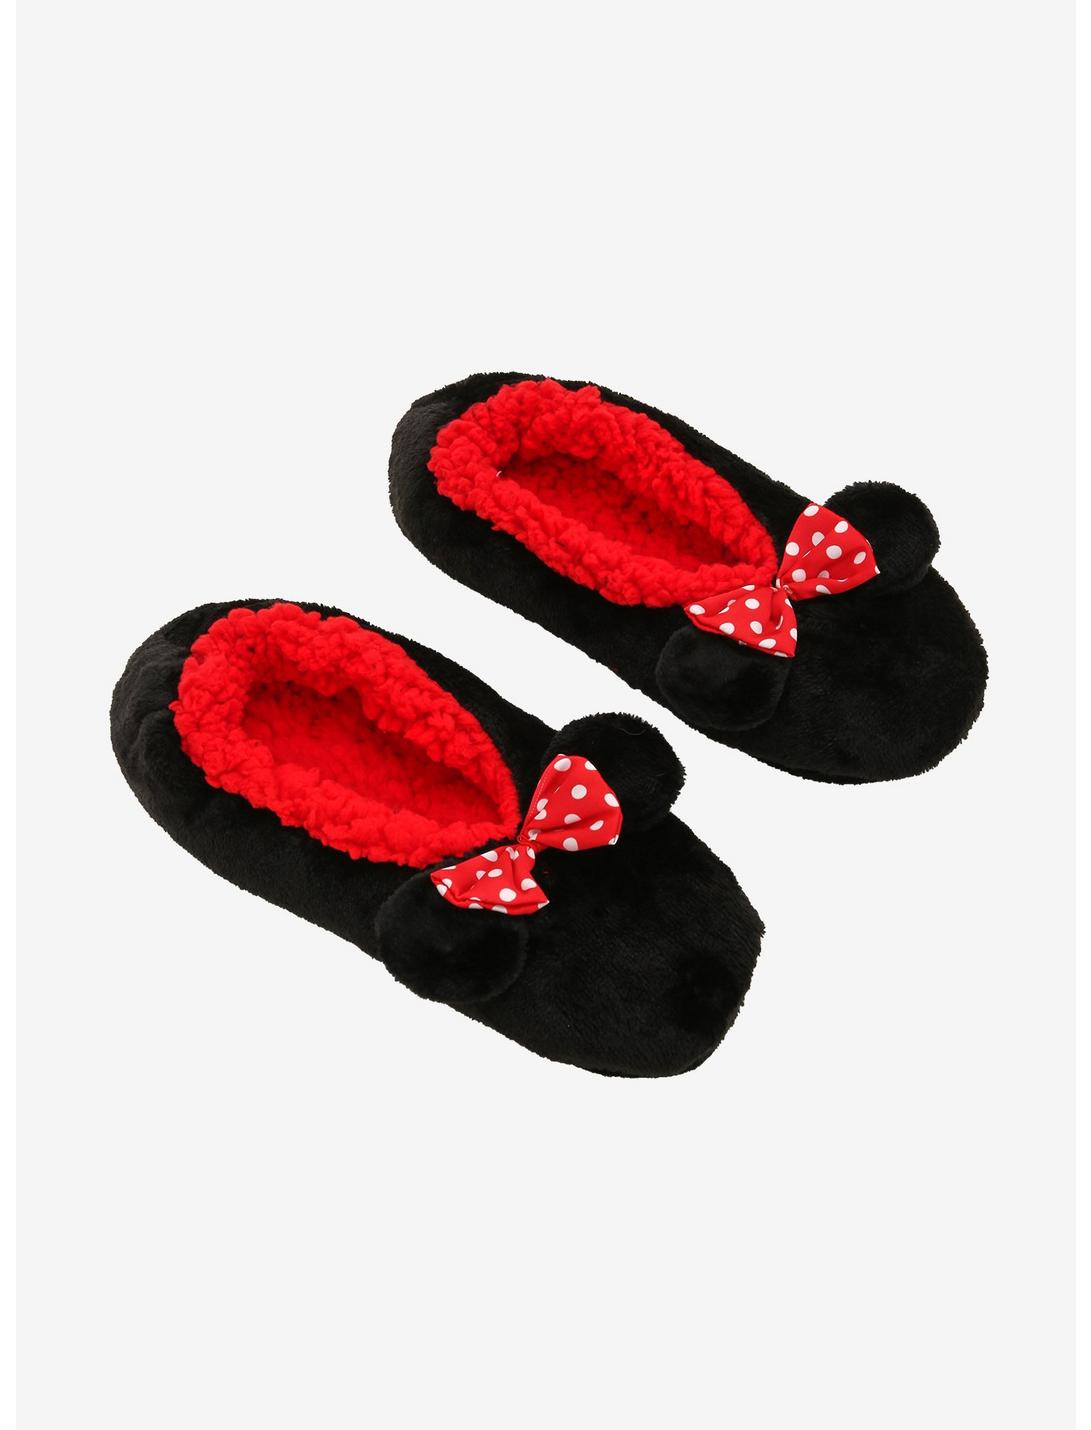 Disney Minnie Mouse Figural Cozy Slippers, MULTI, hi-res